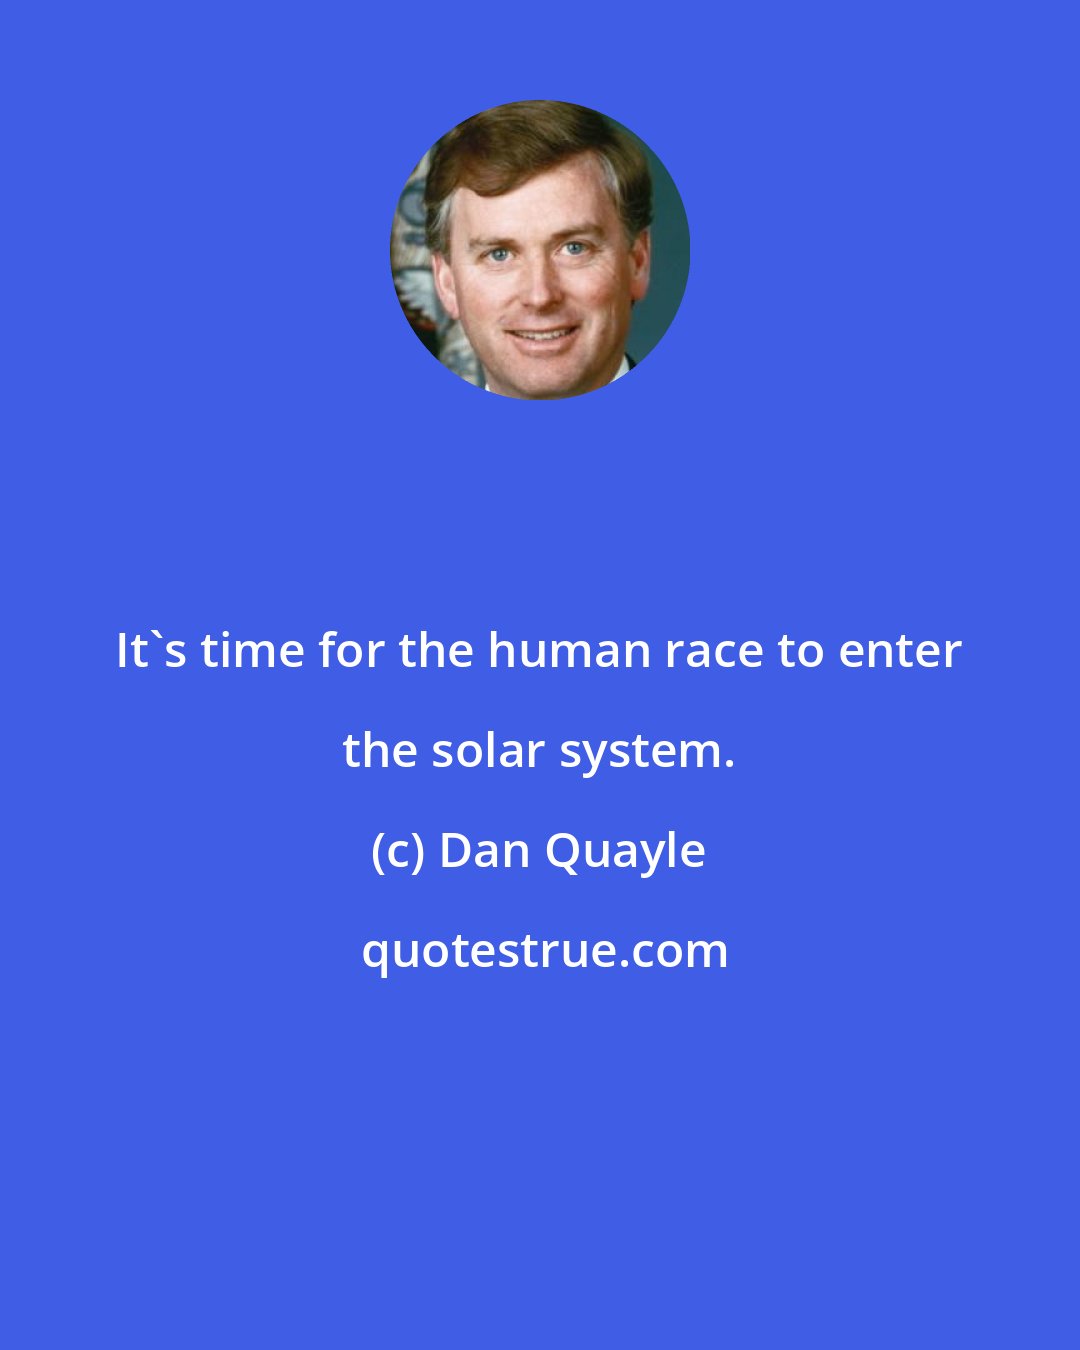 Dan Quayle: It's time for the human race to enter the solar system.